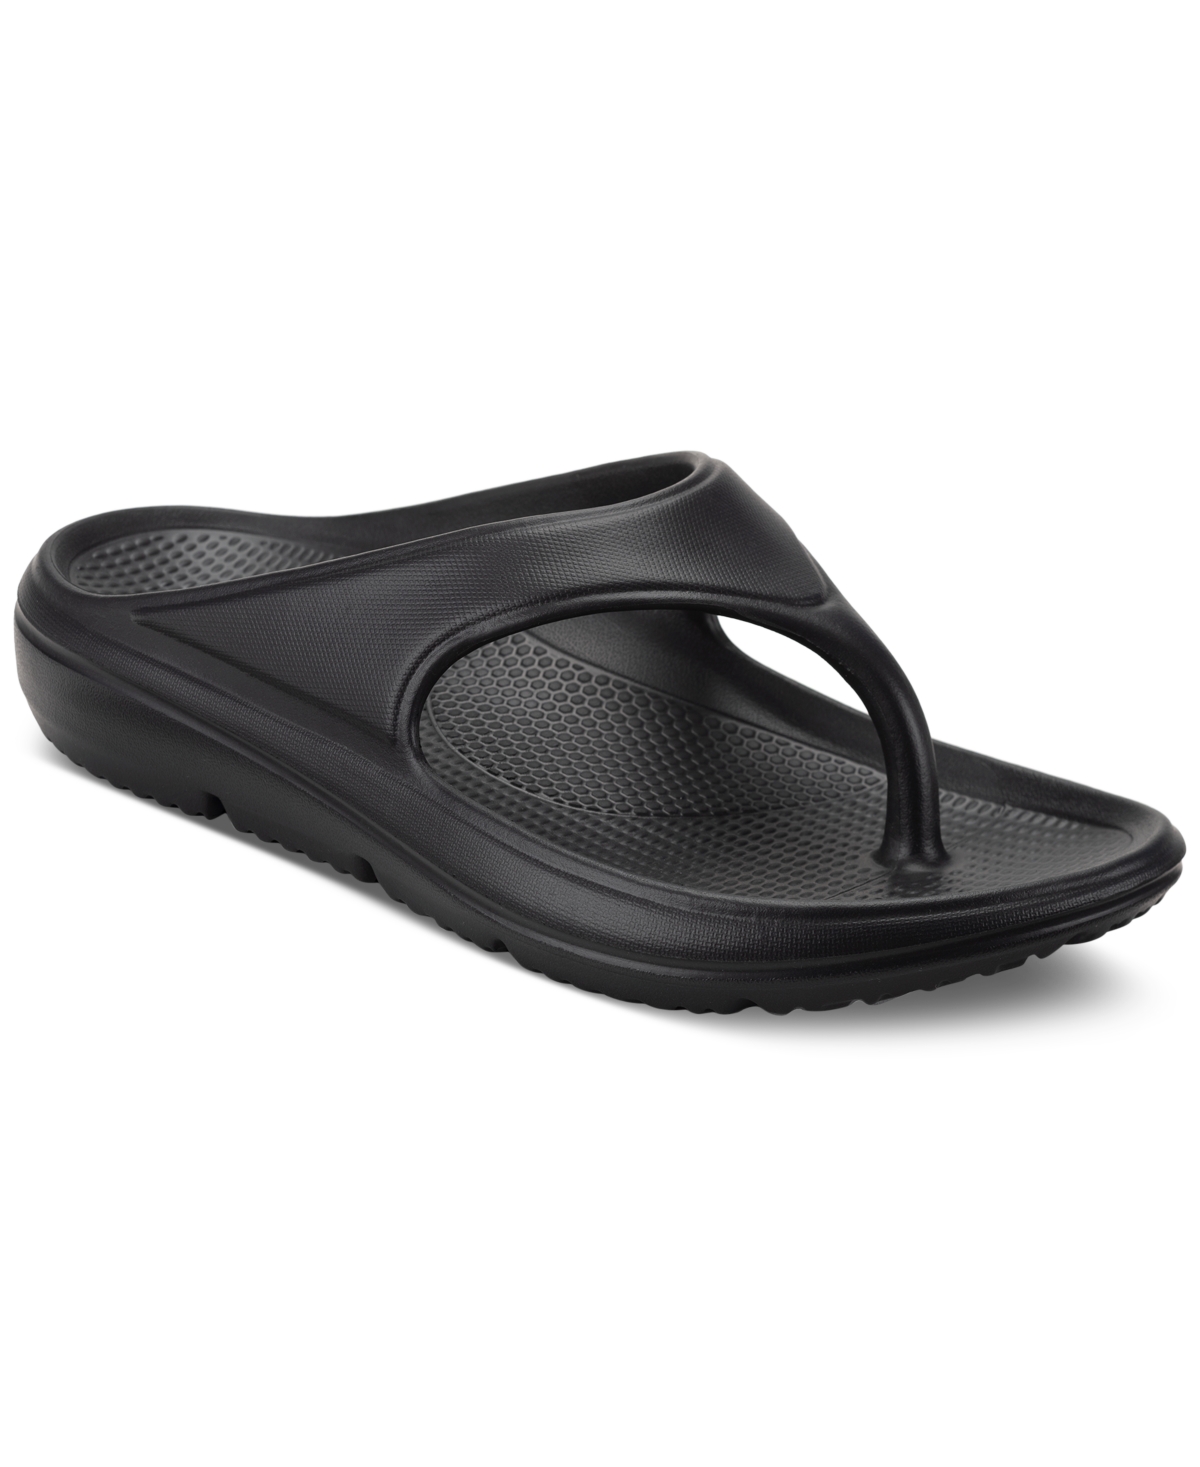 Men's Remy Thong Sandals, Created for Macy's - Navy